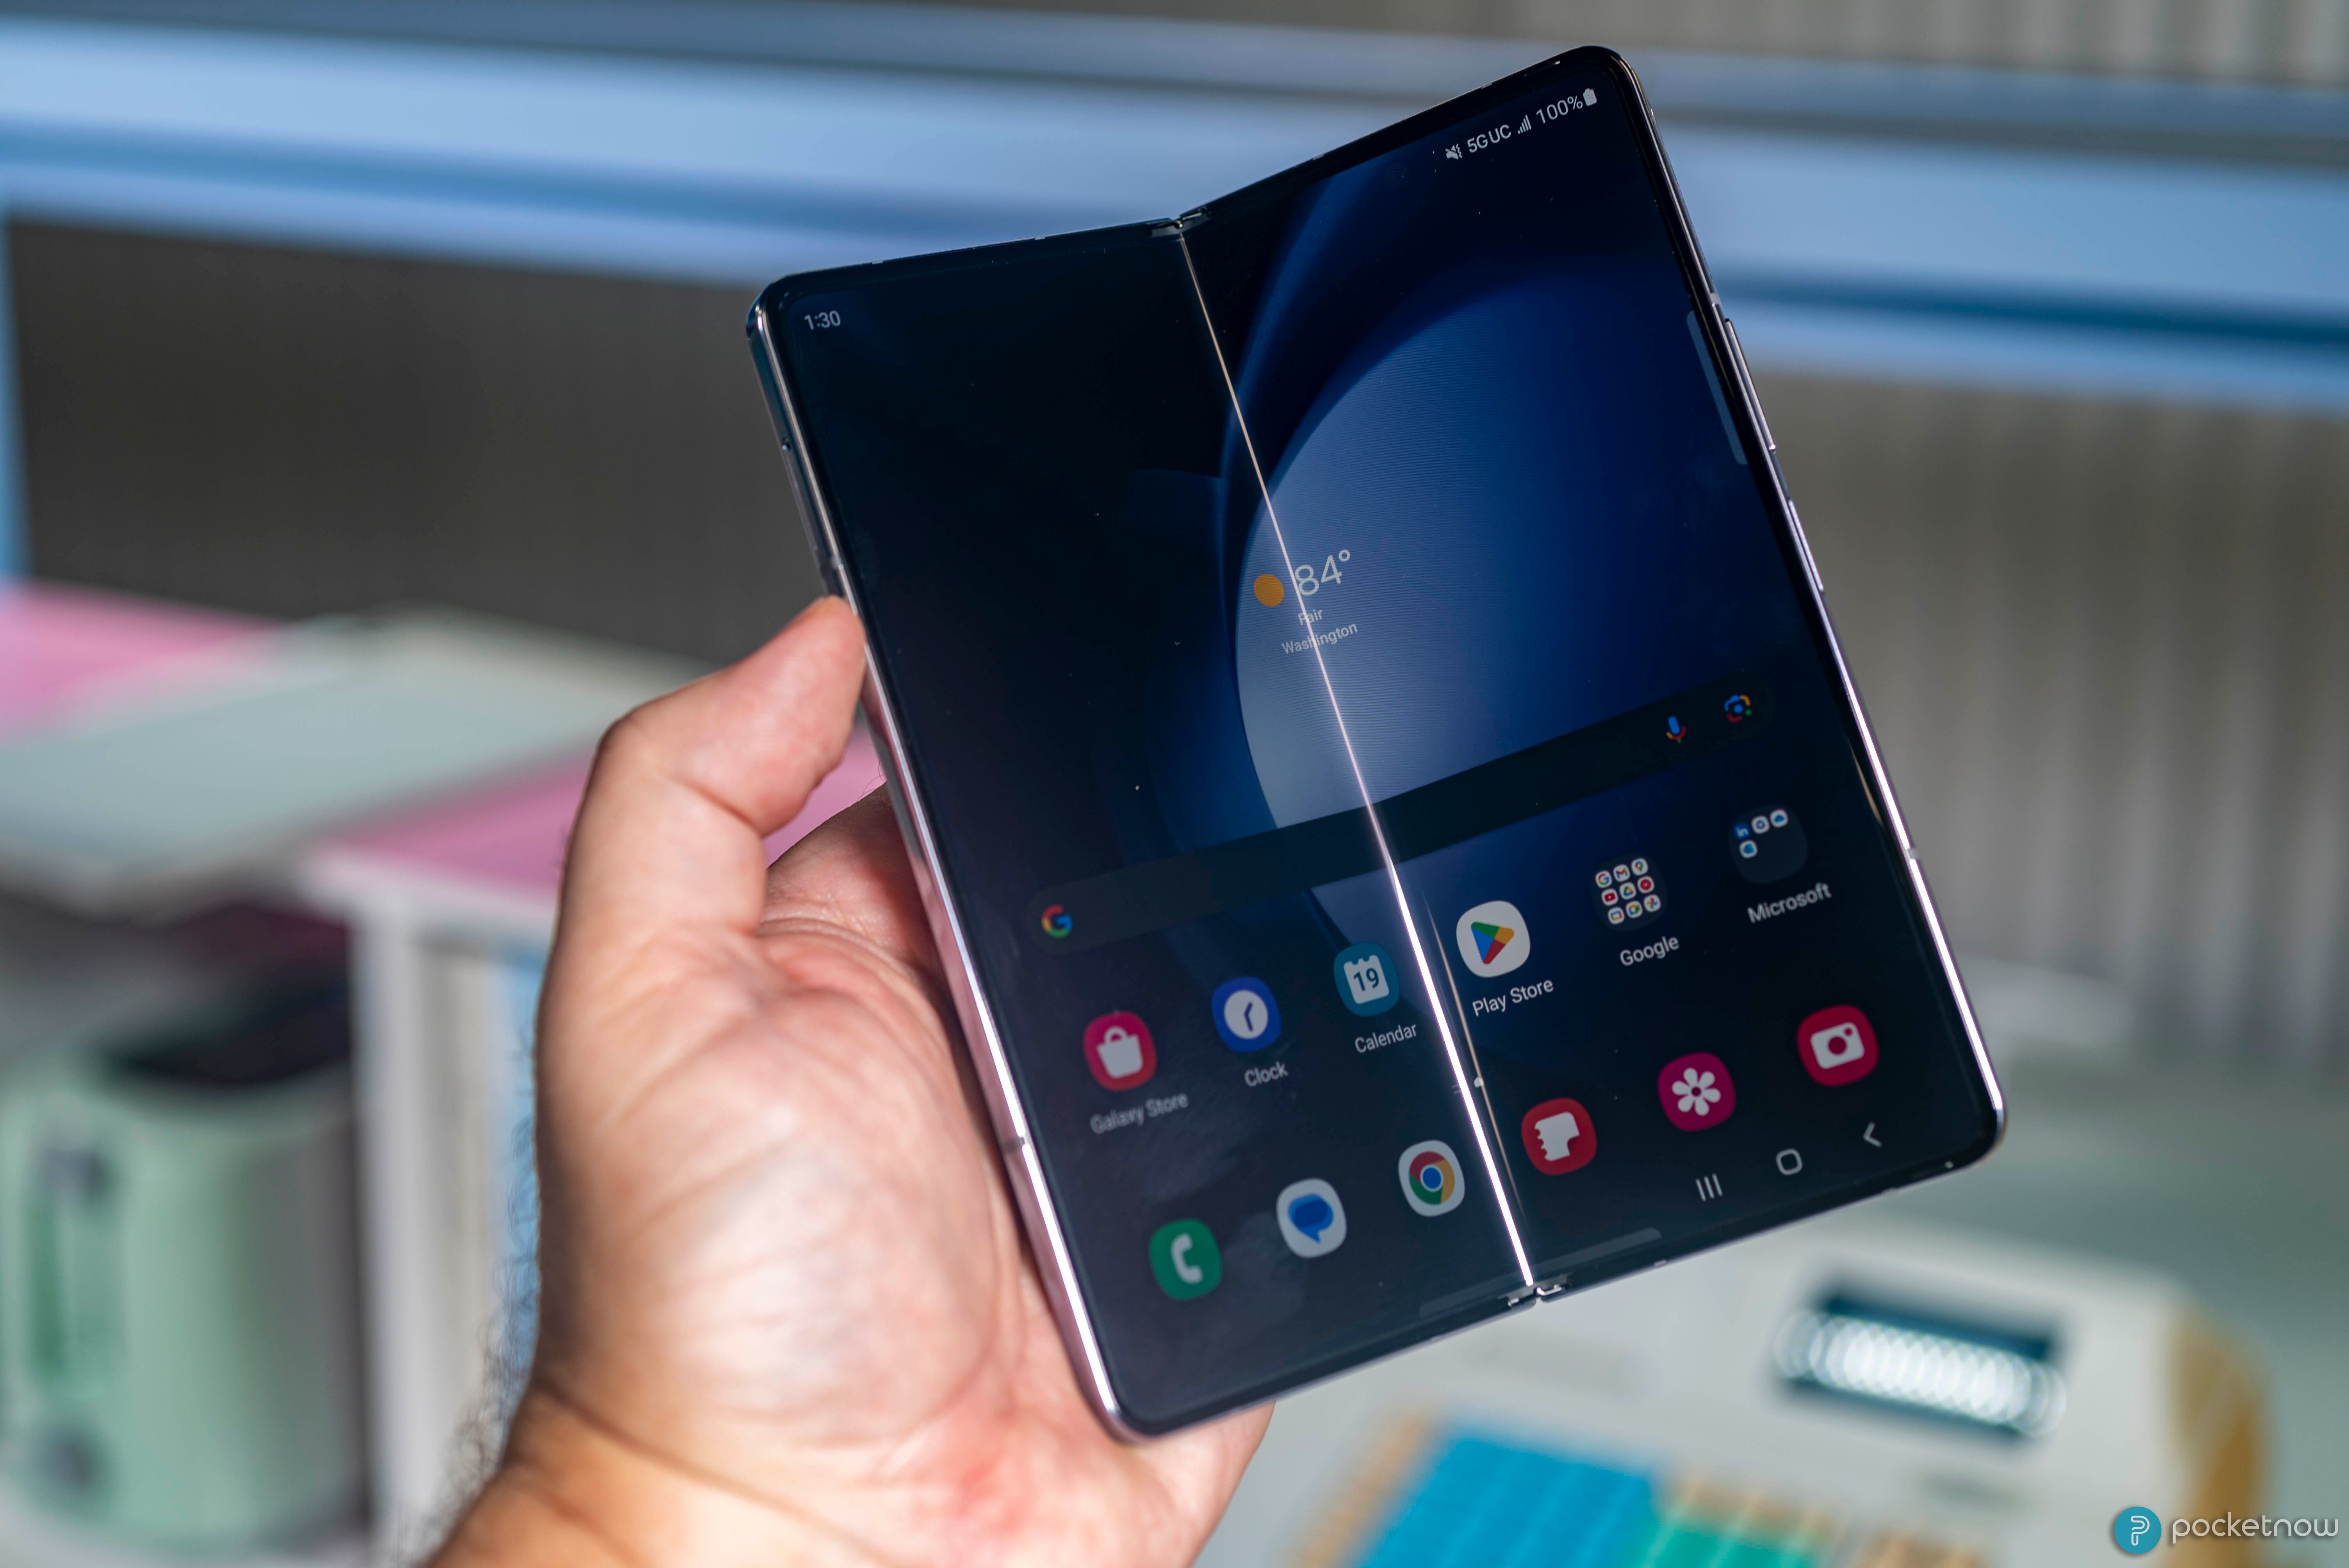 Samsung Galaxy Z Fold 5 Rumors: Everything to Know Before Galaxy